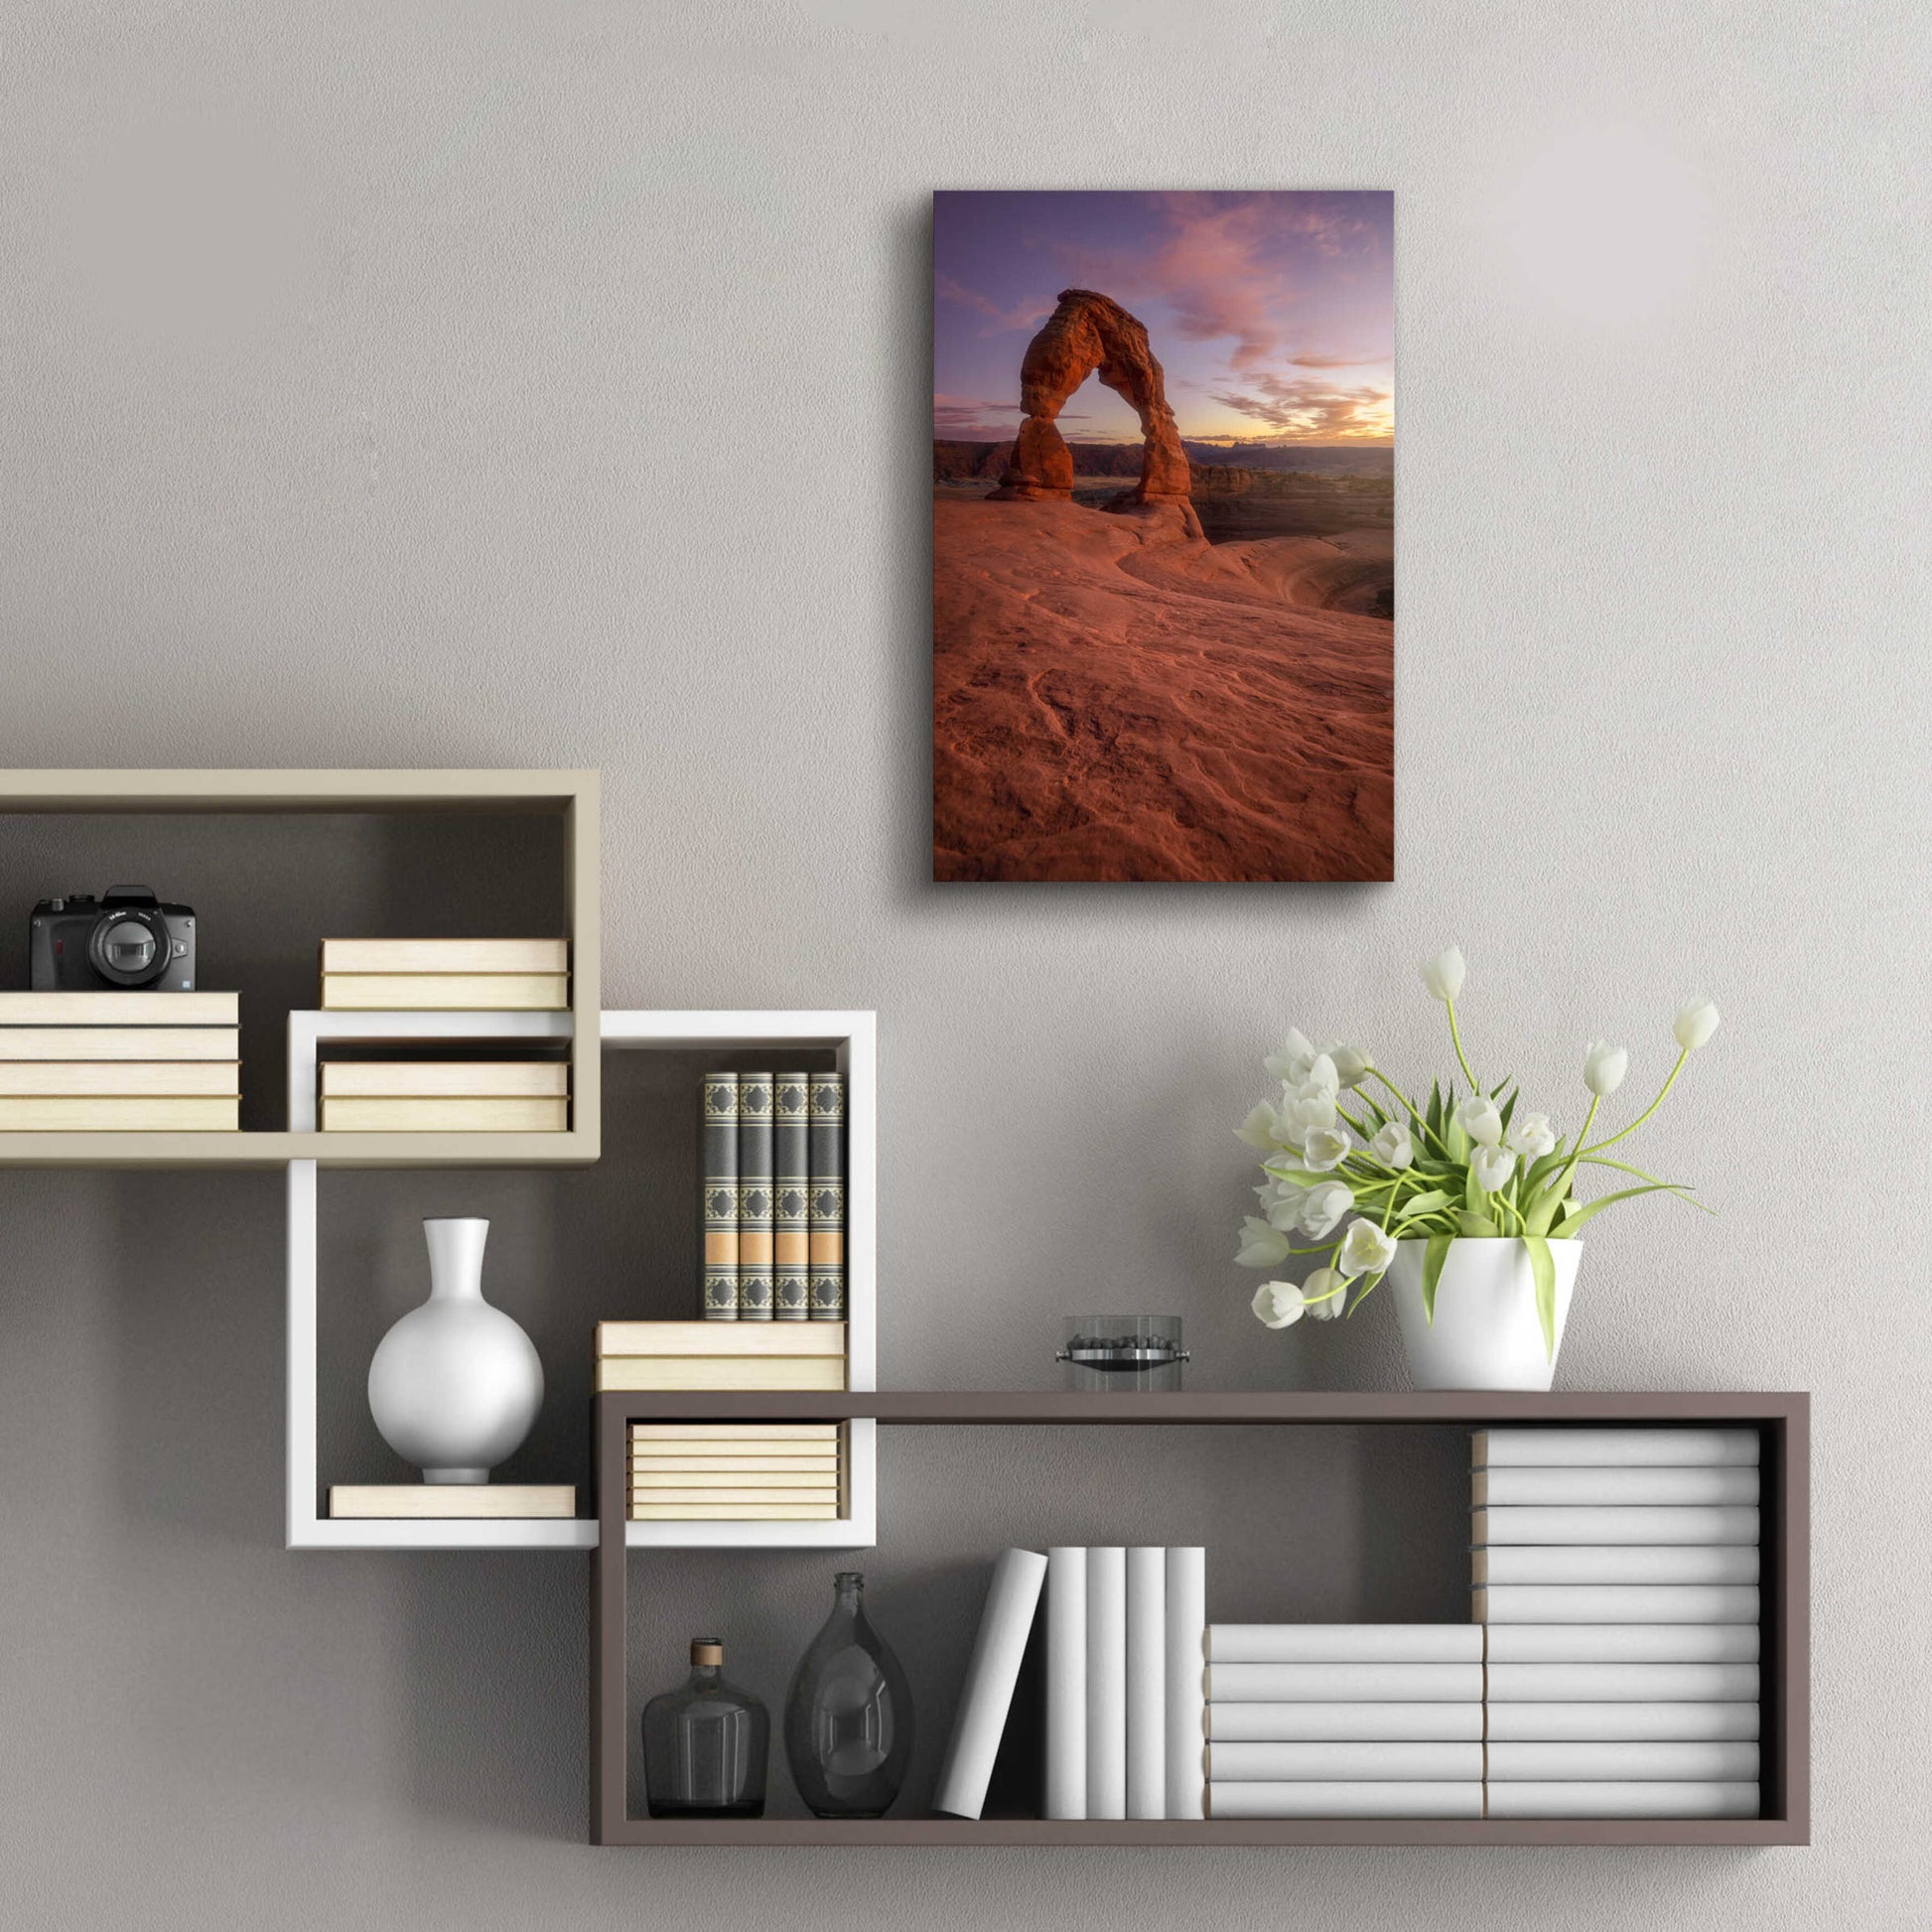 Epic Art 'Lonesome Sunset - Arches National Park' by Darren White, Acrylic Glass Wall Art,16x24